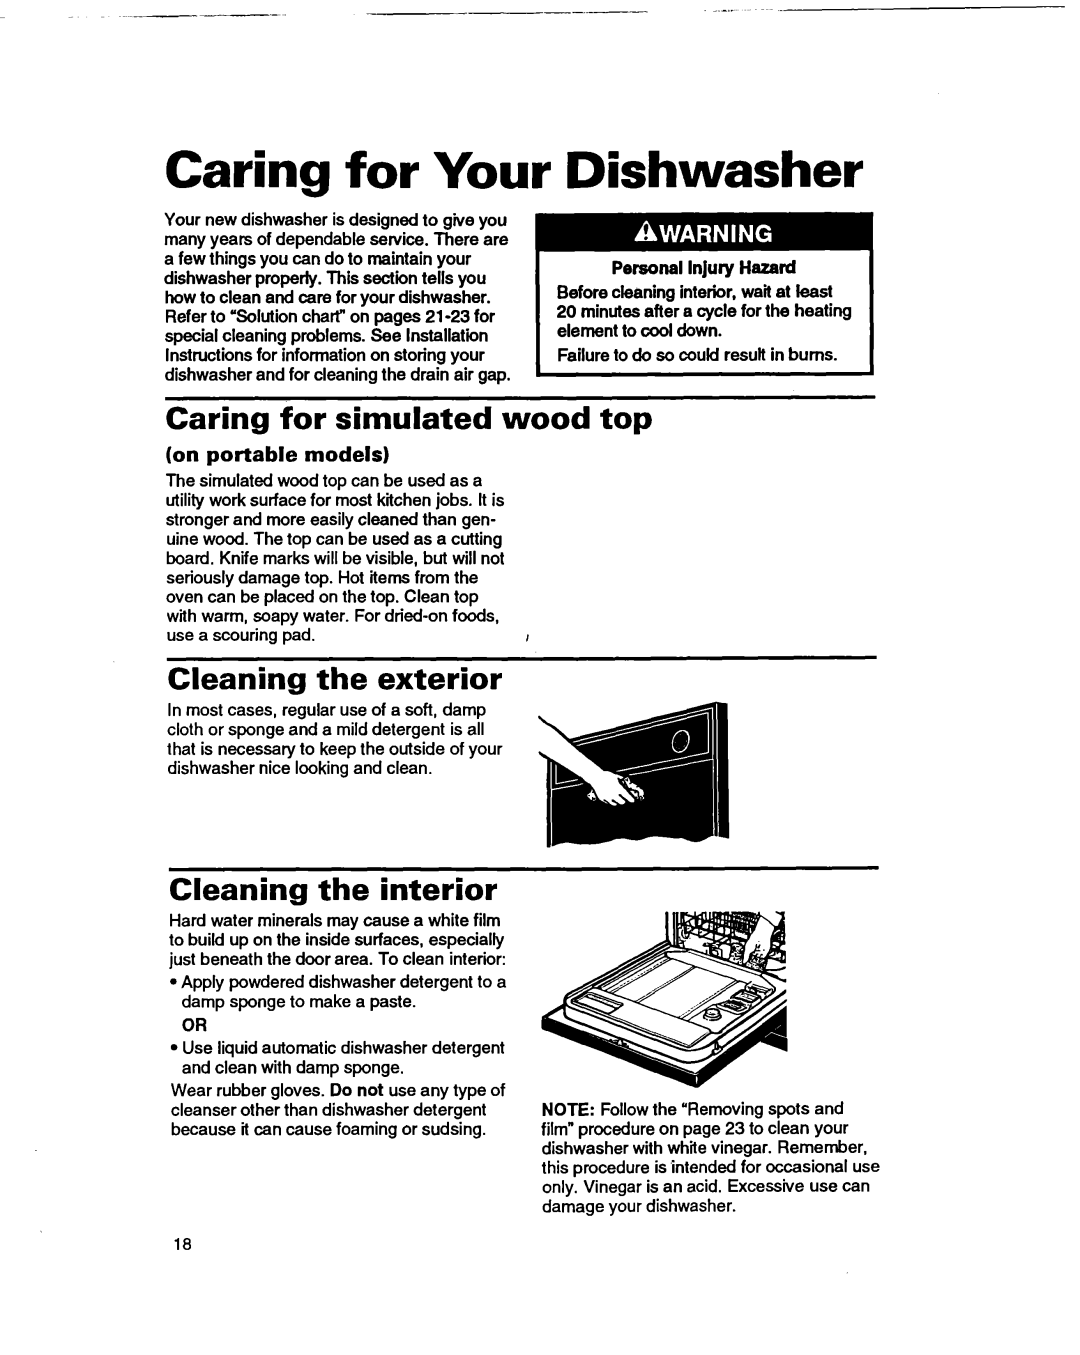 Whirlpool 400 Caring for Your, Dishwasher, Caring for simulated wood top, Cleaning the exterior, Cleaning the interior 